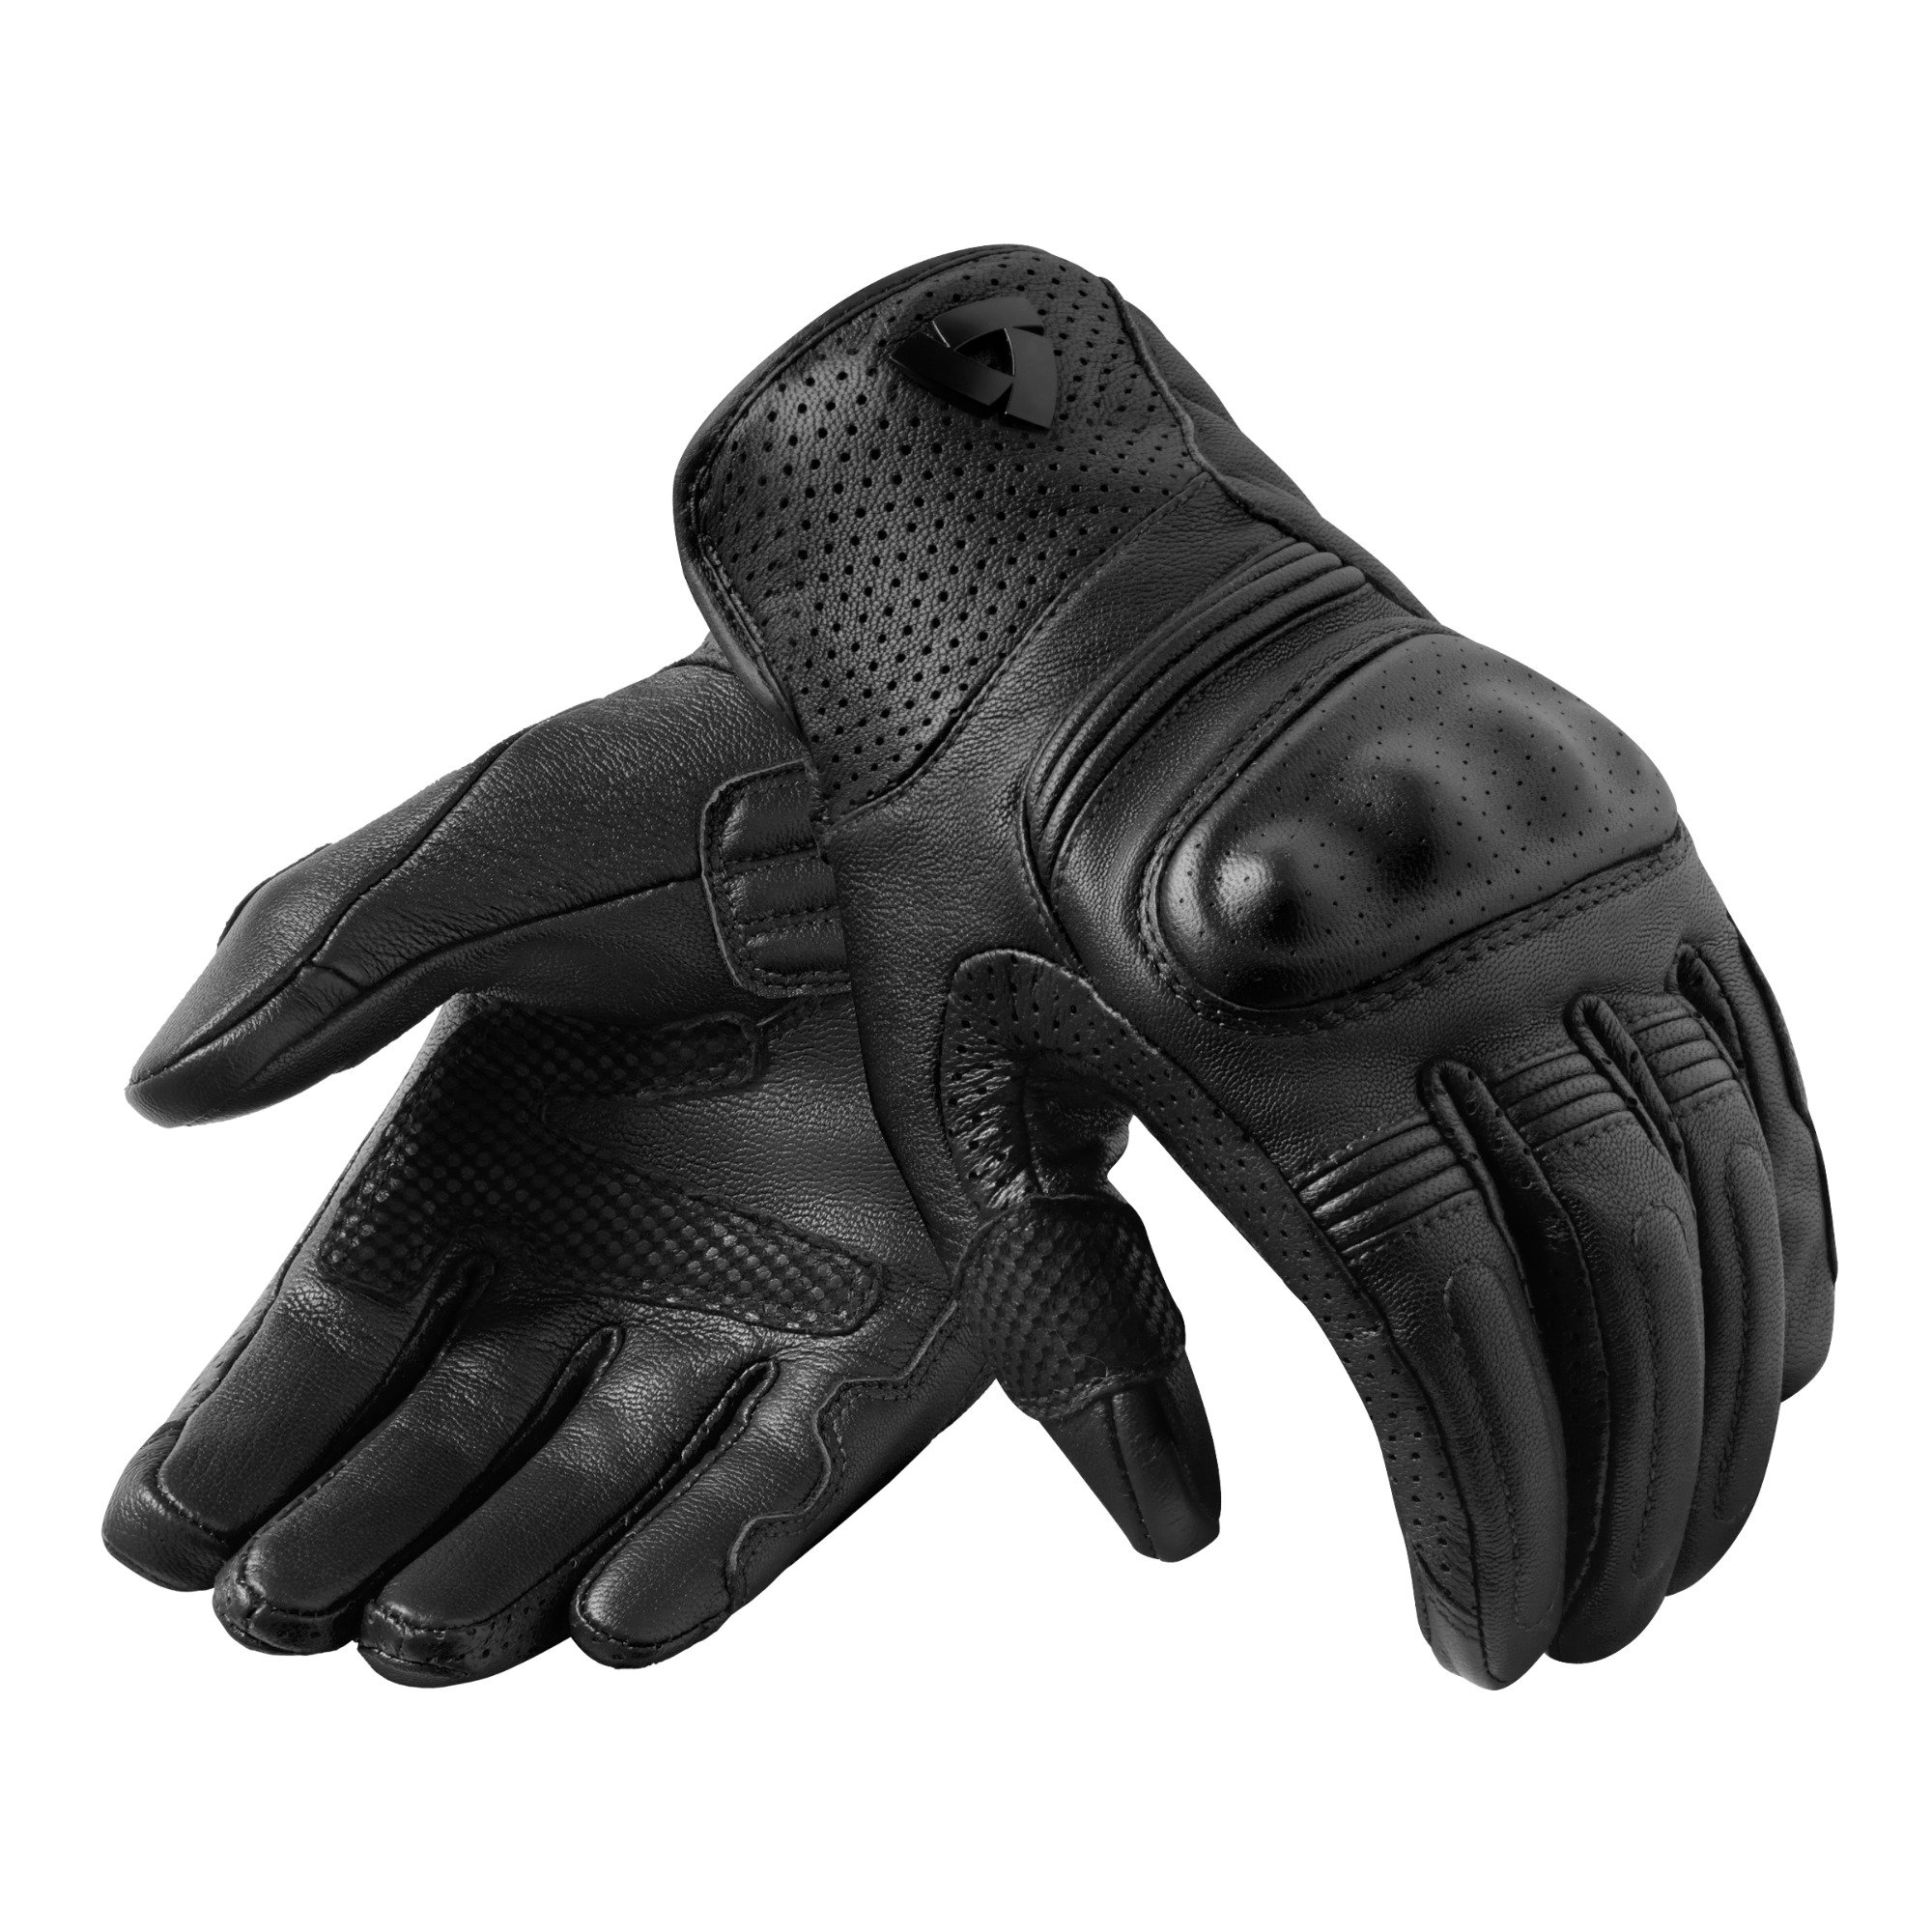 Image of REV'IT! Gloves Monster 3 Black Size XL ID 8700001360142